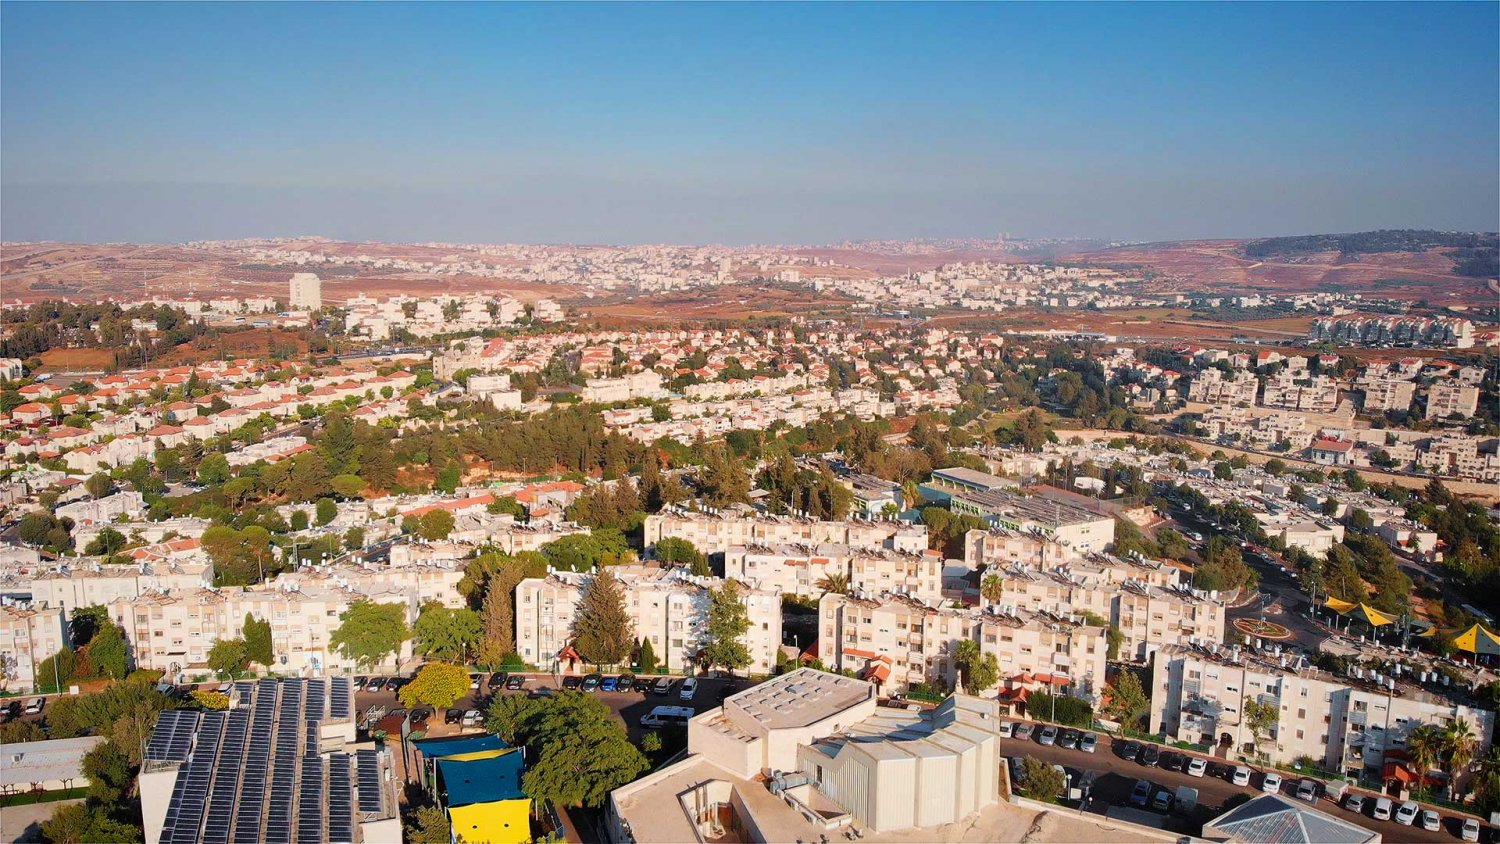 The Israeli settlement Giv‘at Ze’ev in the occupied West Bank